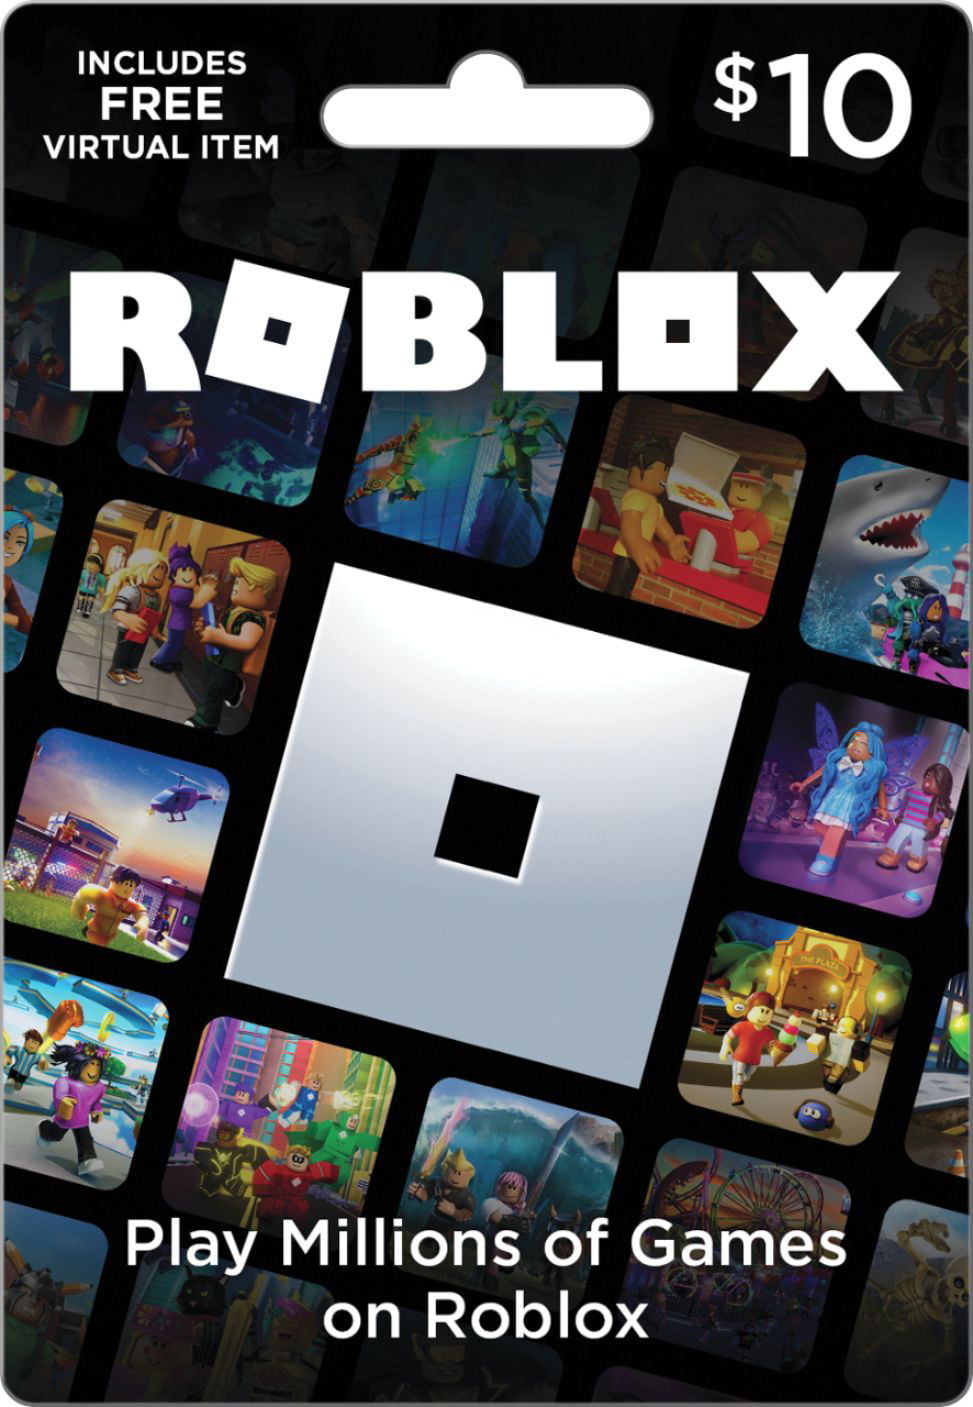 Roblox 10 Digital Gift Card Includes Exclusive Virtual Item Digital Download Walmart Com Walmart Com - where to find roblox game cards